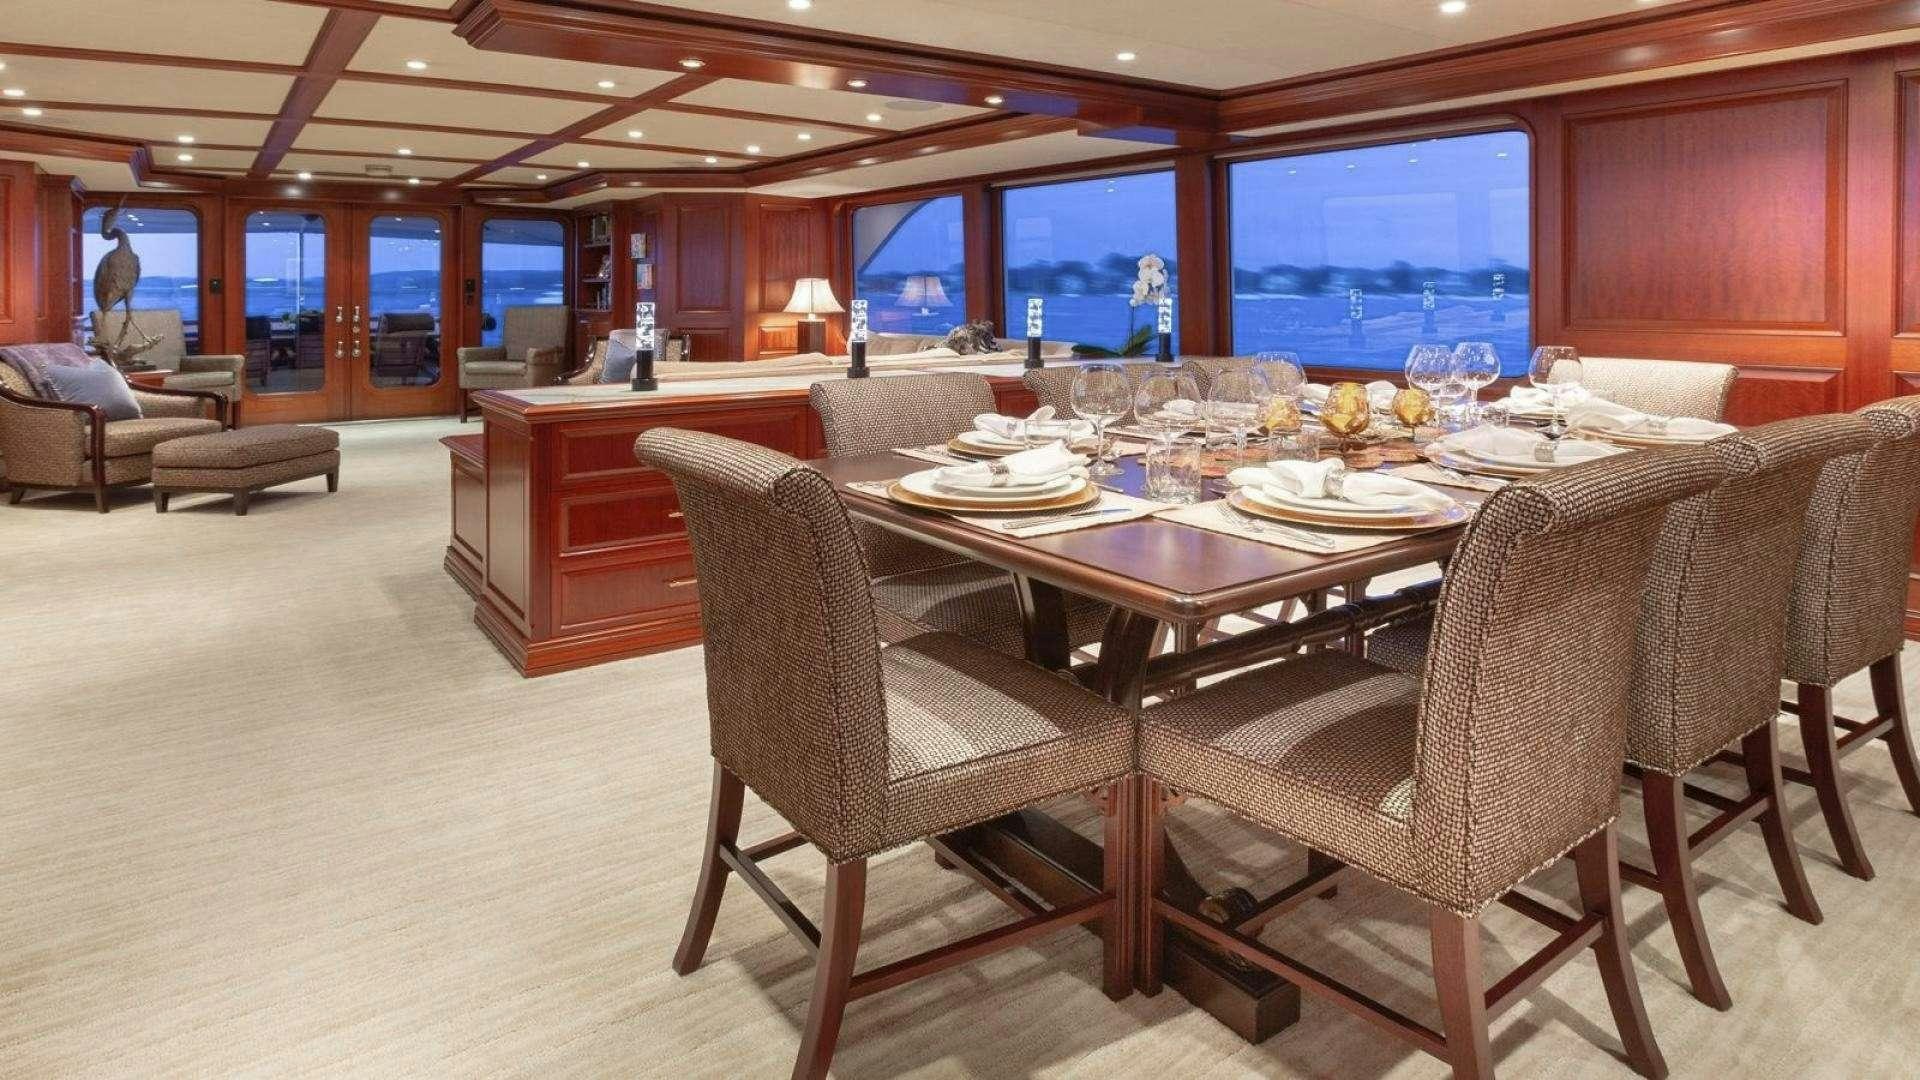 Seasonal Rates for IMPETUOUS Private Luxury Yacht For Charter